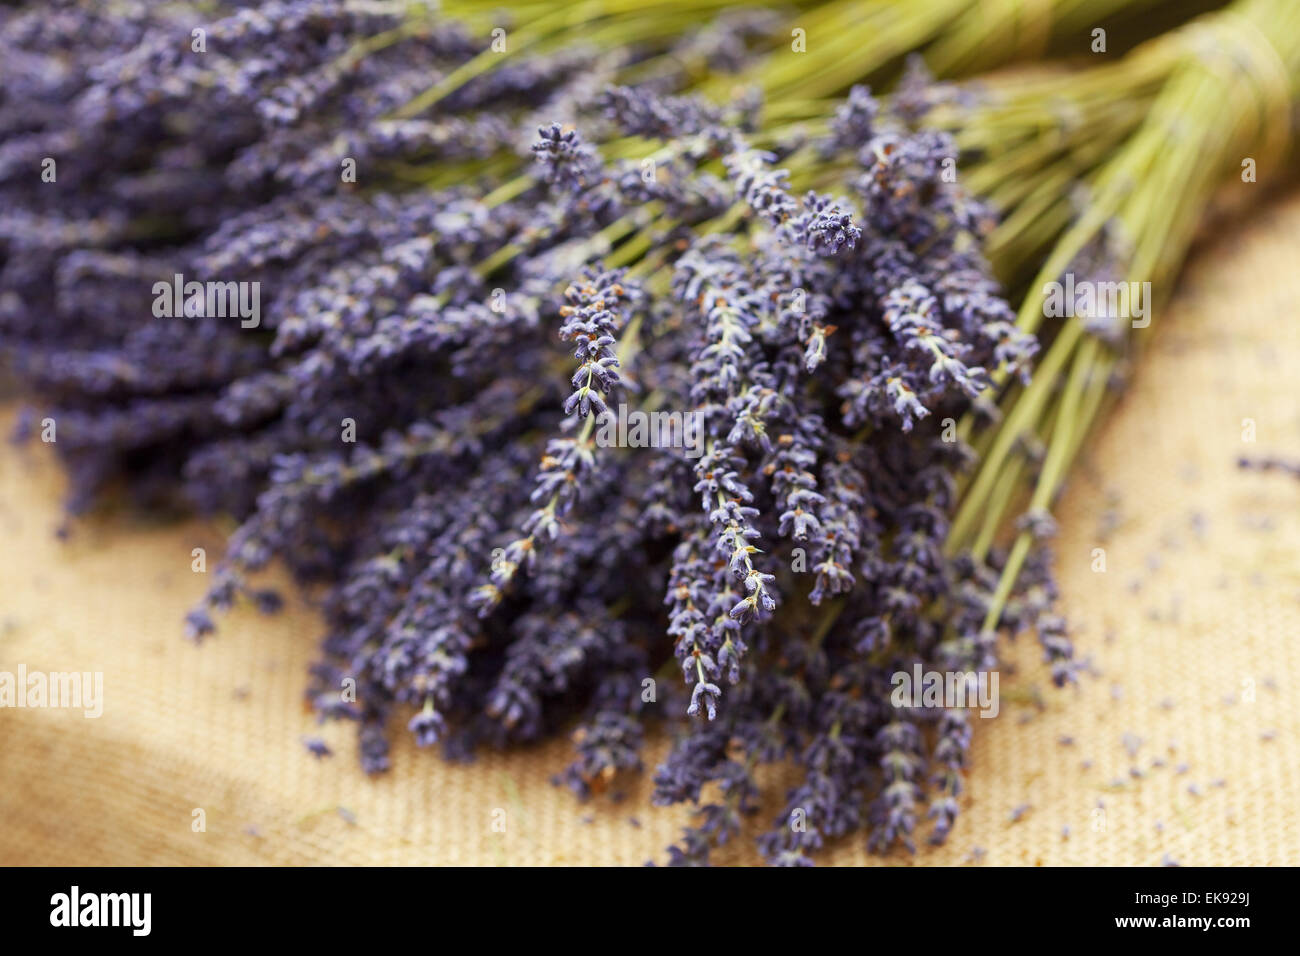 bunch of lavender Stock Photo